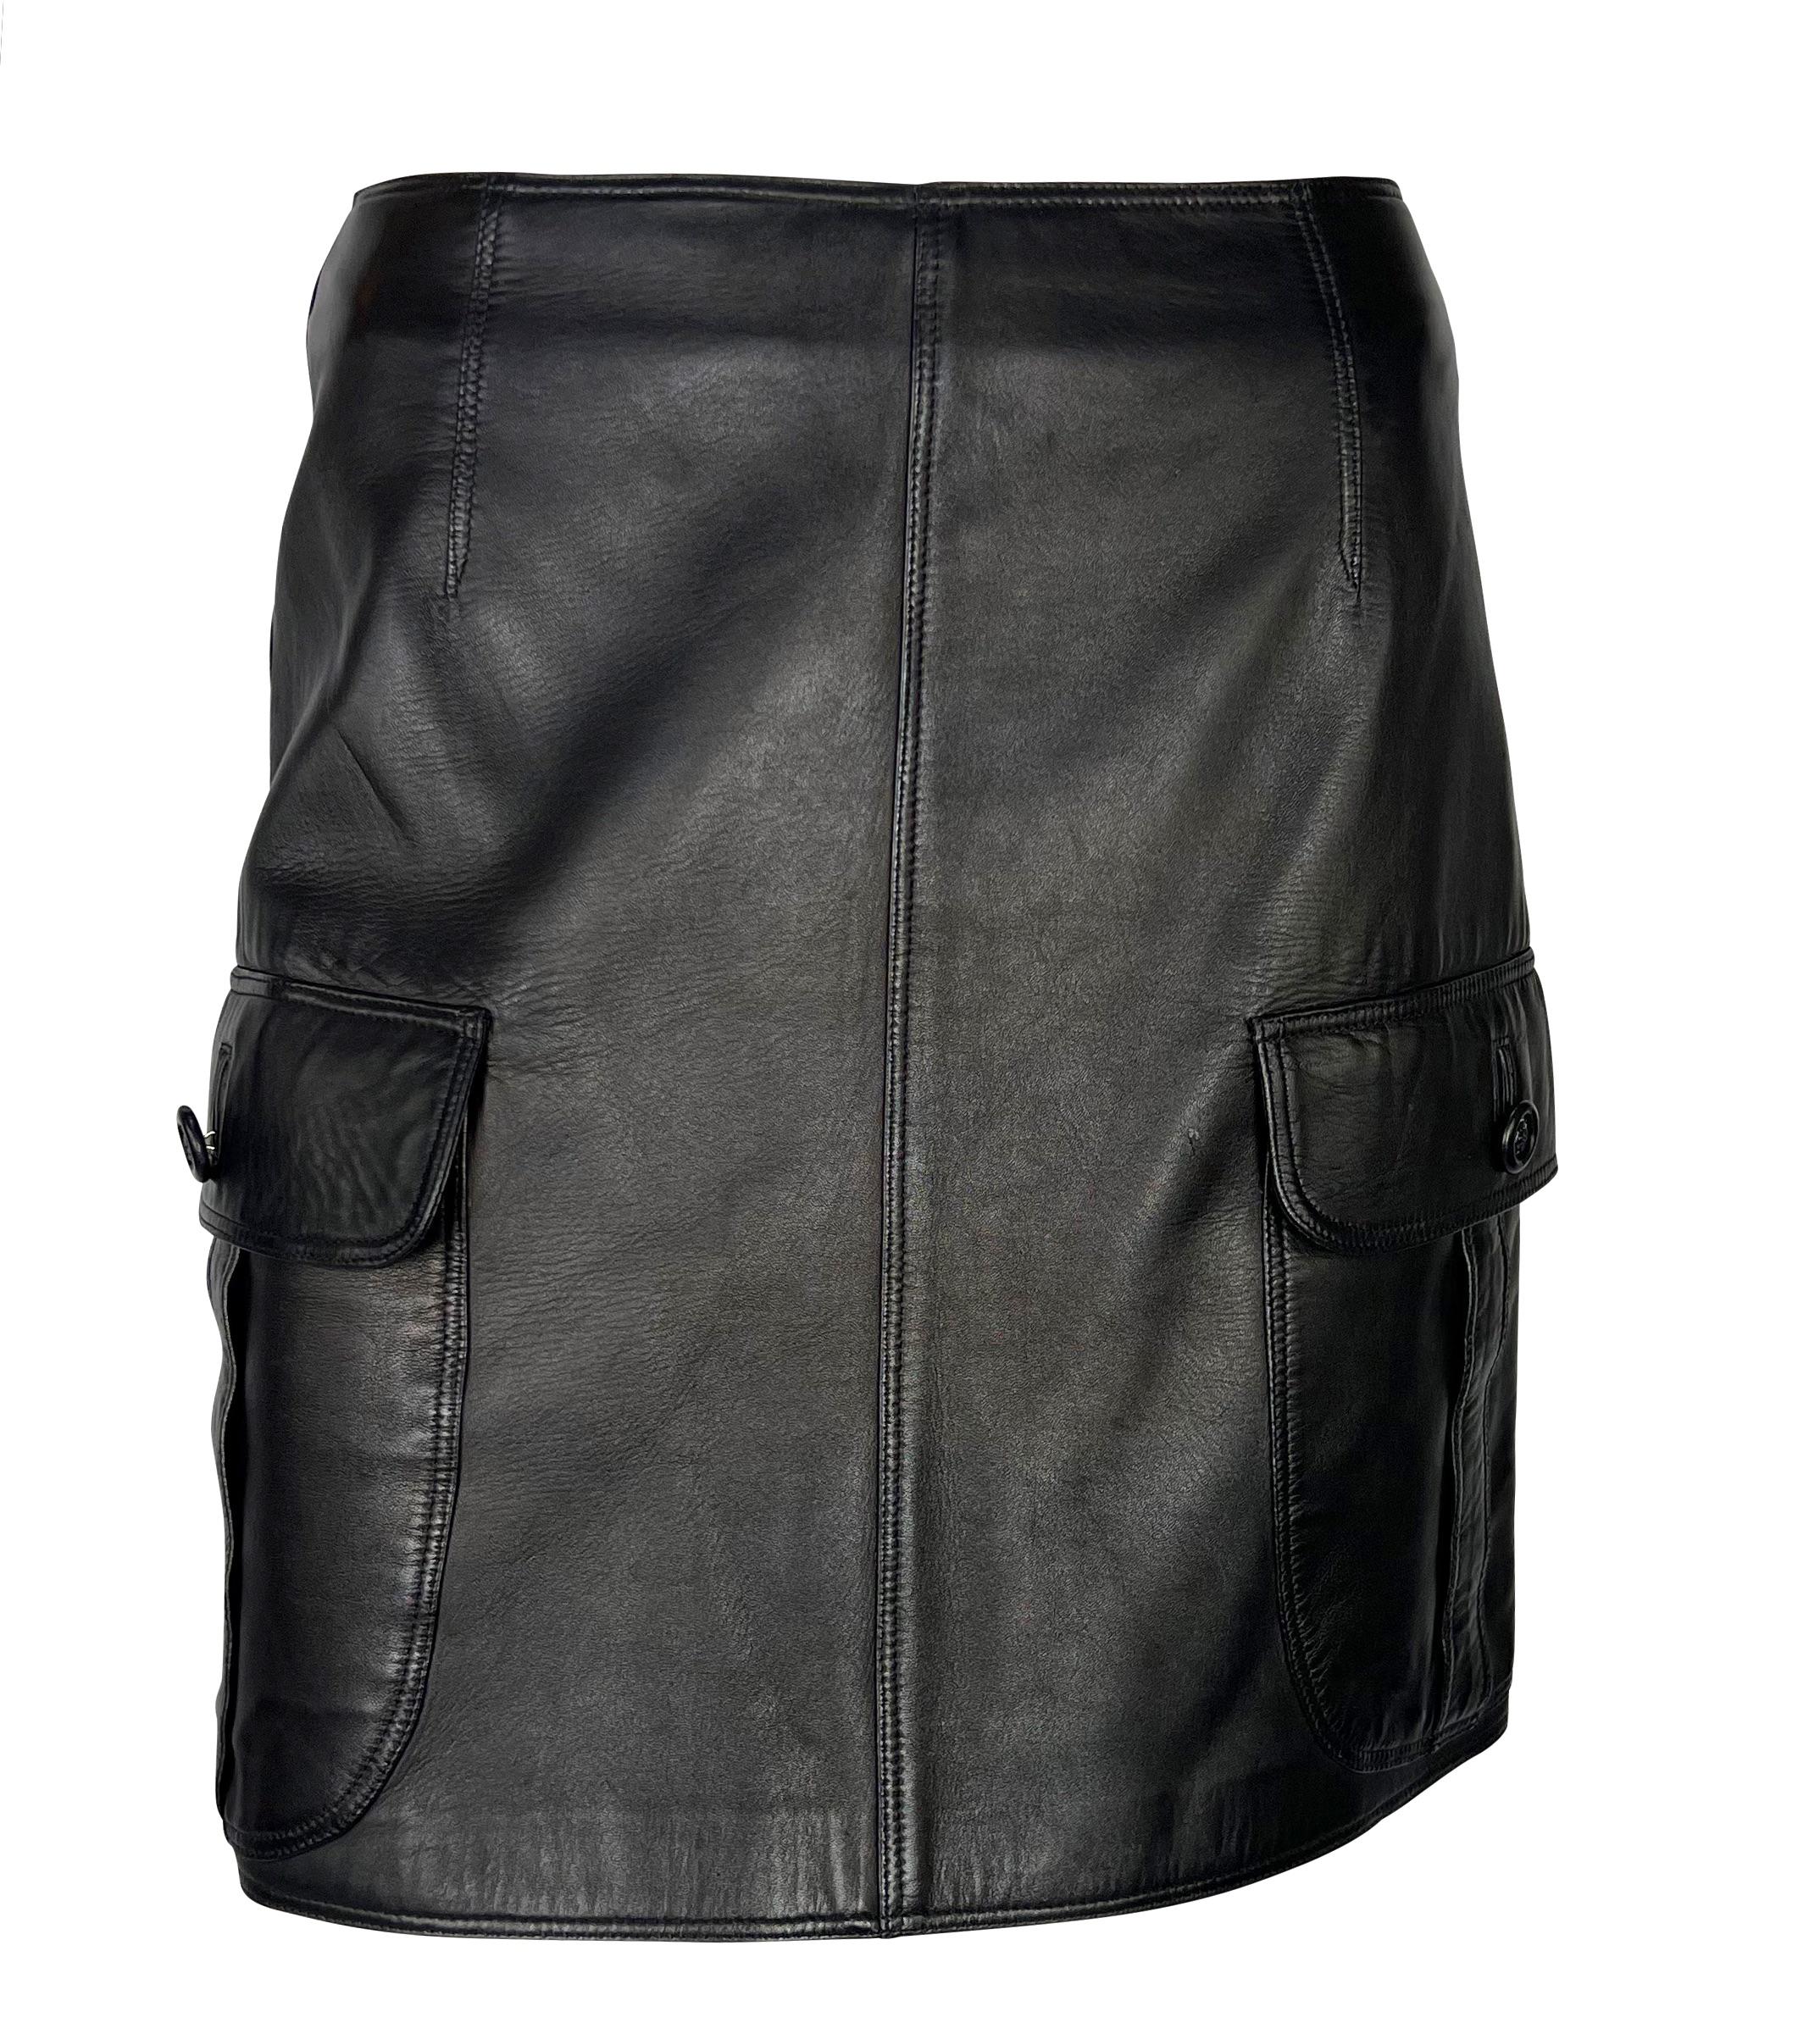 F/W 1996 Gianni Versace Runway Black Leather Medusa Pocket Mini Skirt In Good Condition For Sale In West Hollywood, CA